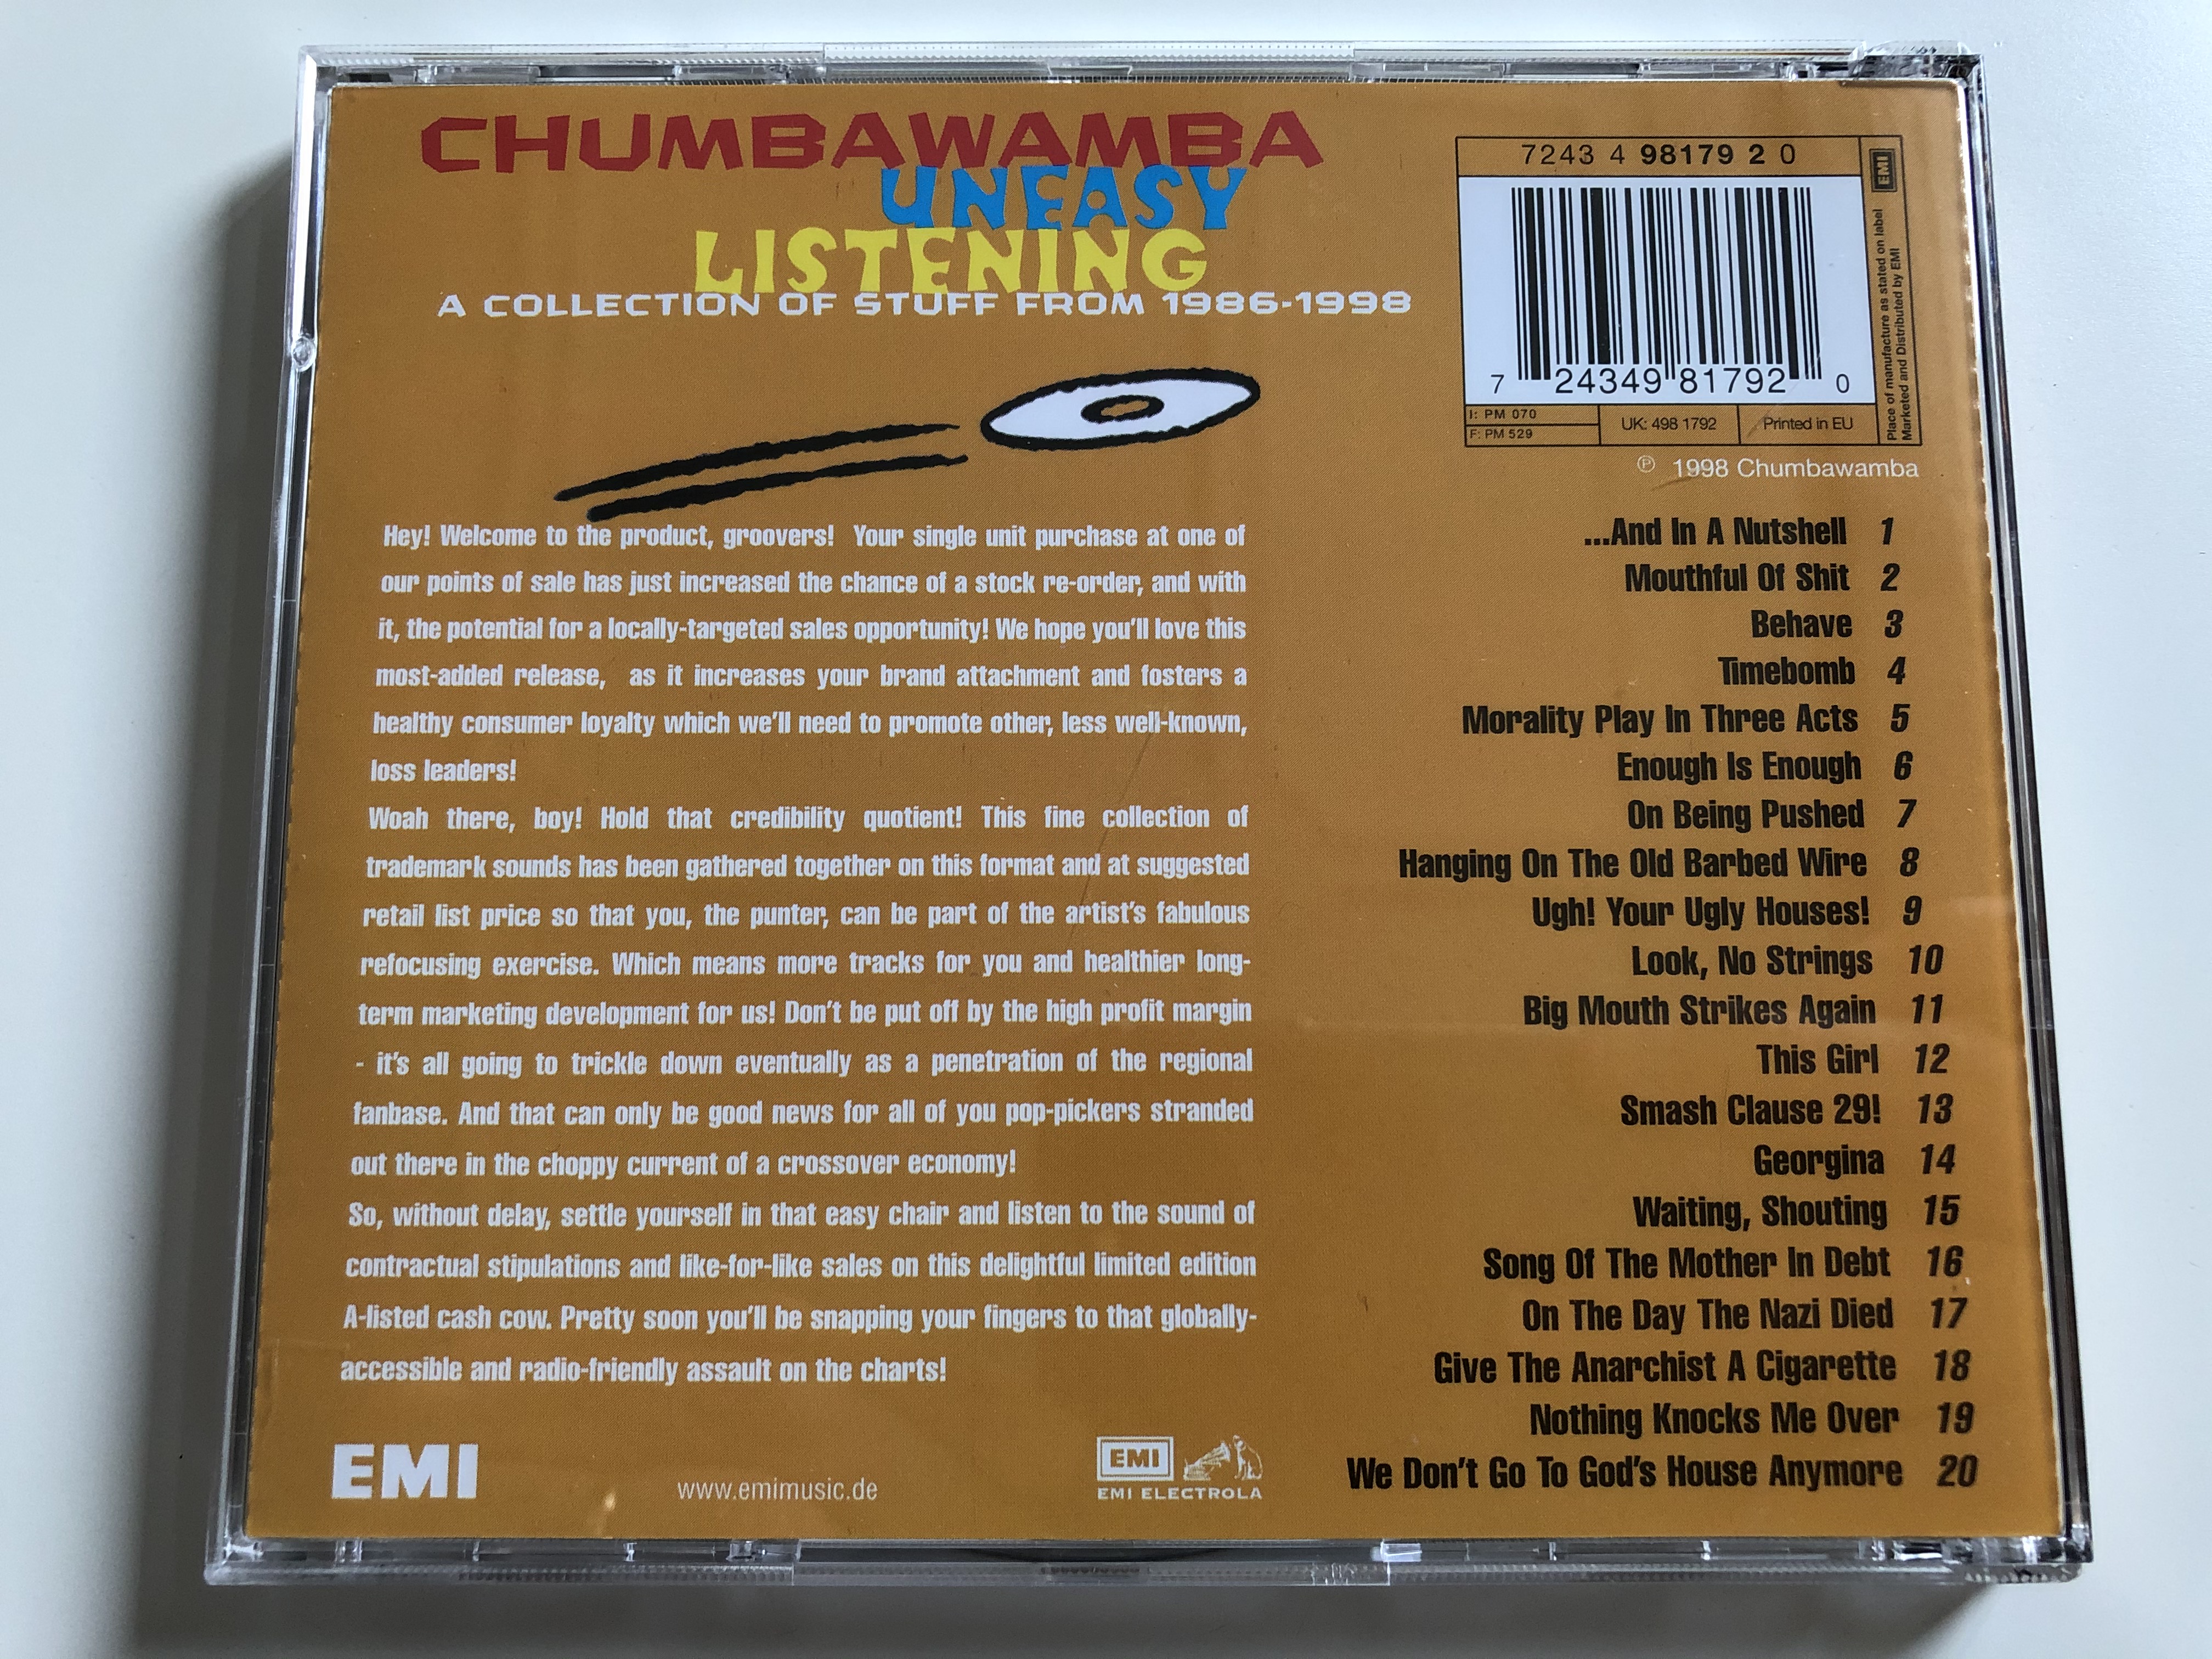 chumbawamba-uneasy-listening-all-good-clean-fun-and-ultimately-harmless-umpteen-years-of-one-legged-men-at-arse-kicking-parties-emi-audio-cd-1998-72434981792-7-.jpg